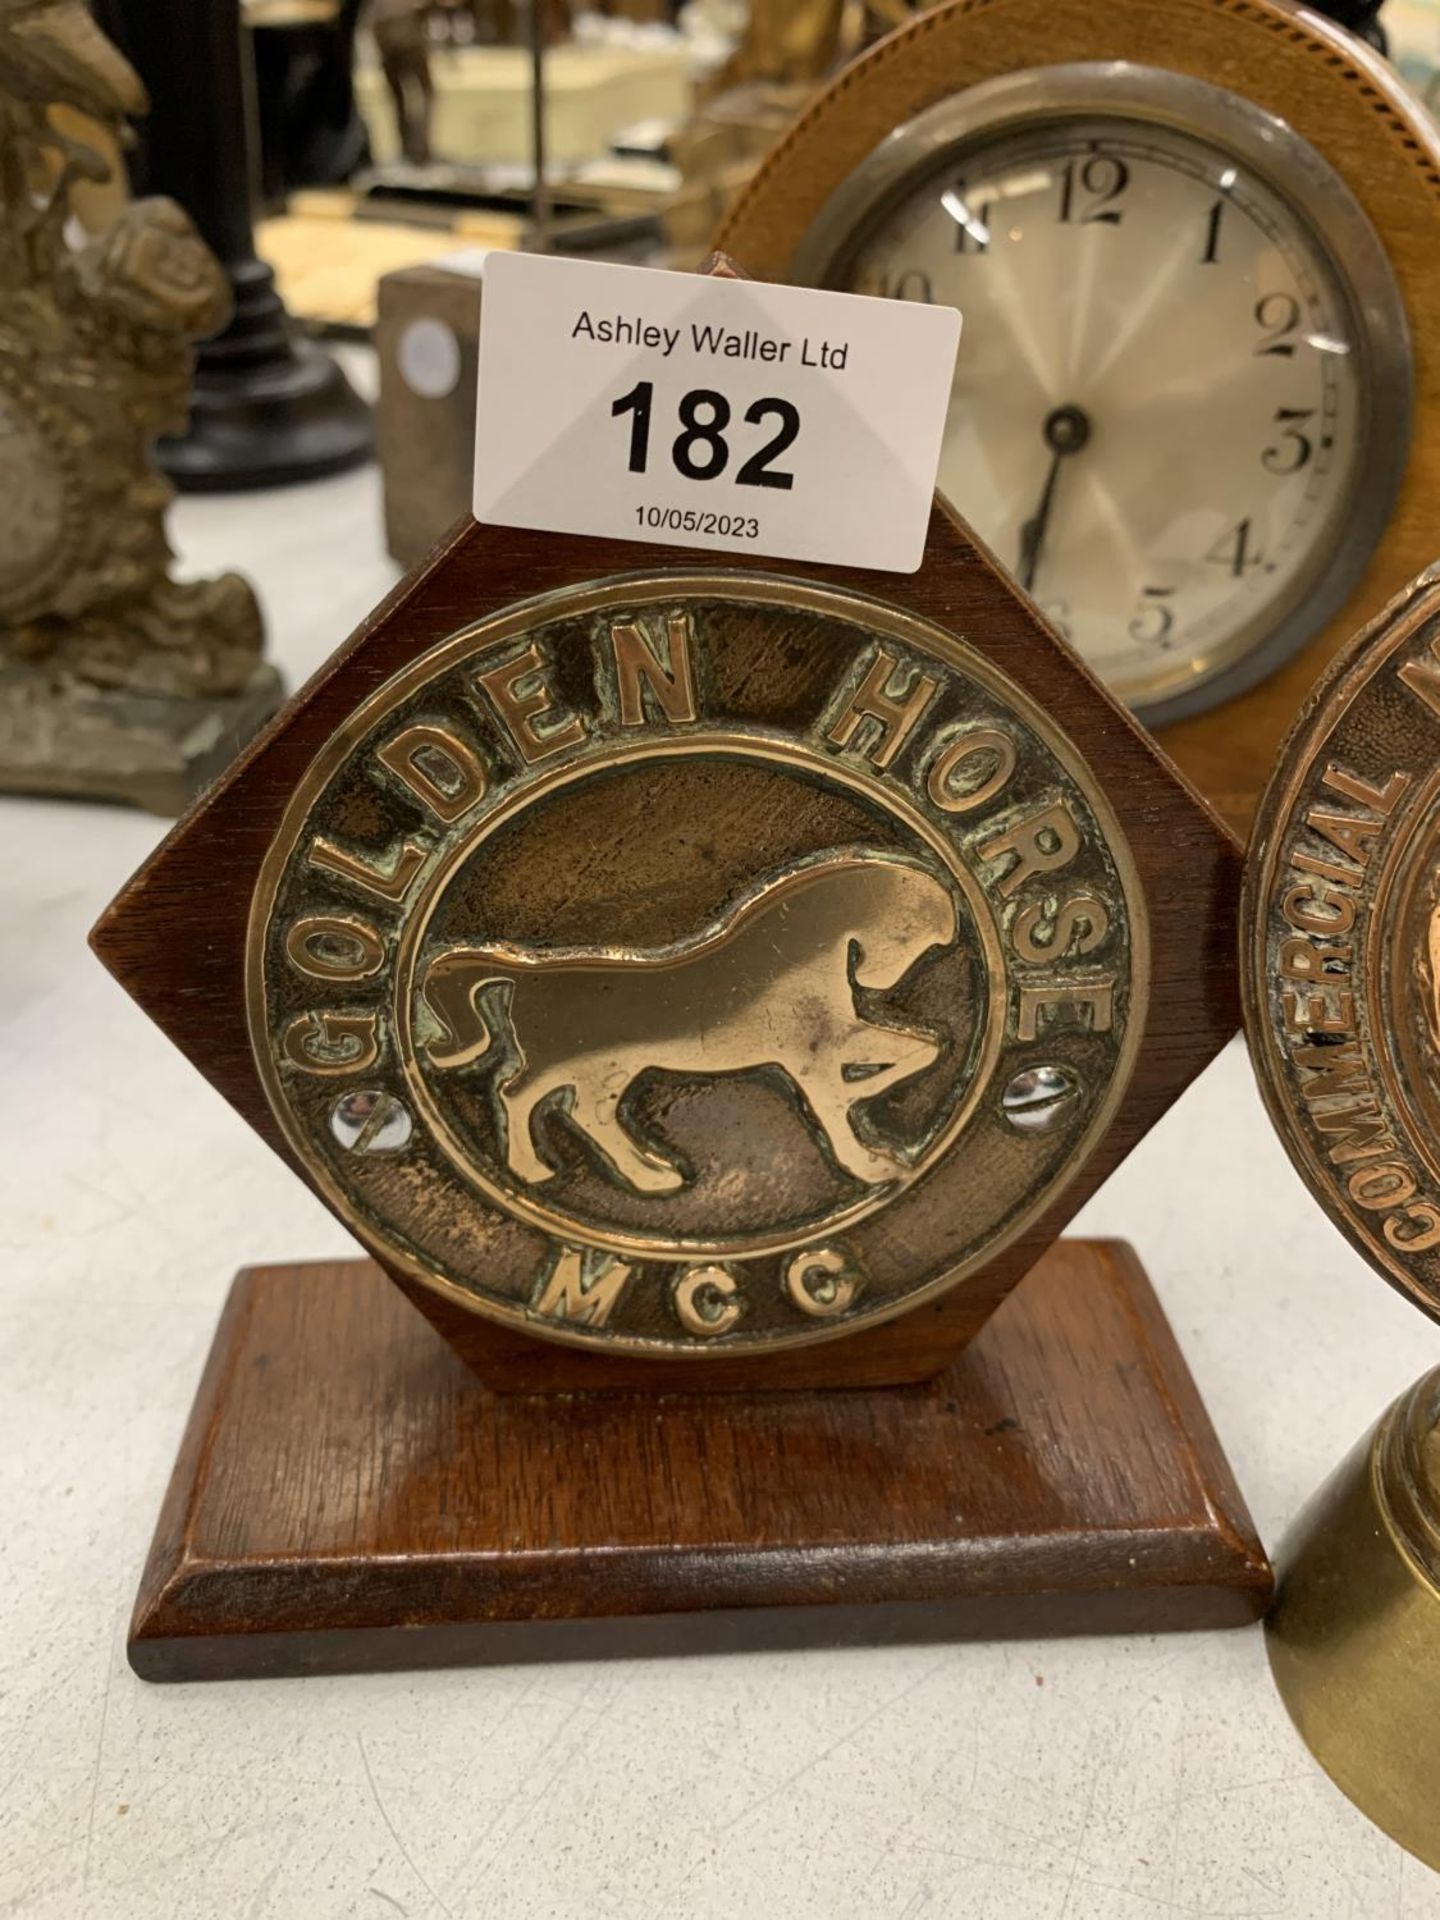 TWO BRASS MOTORING BADGES ON PLINTHS, 'GOLDEN HORSE MCC' AND R.A.C. COMMERCIAL MOTOR USERS - Image 3 of 3